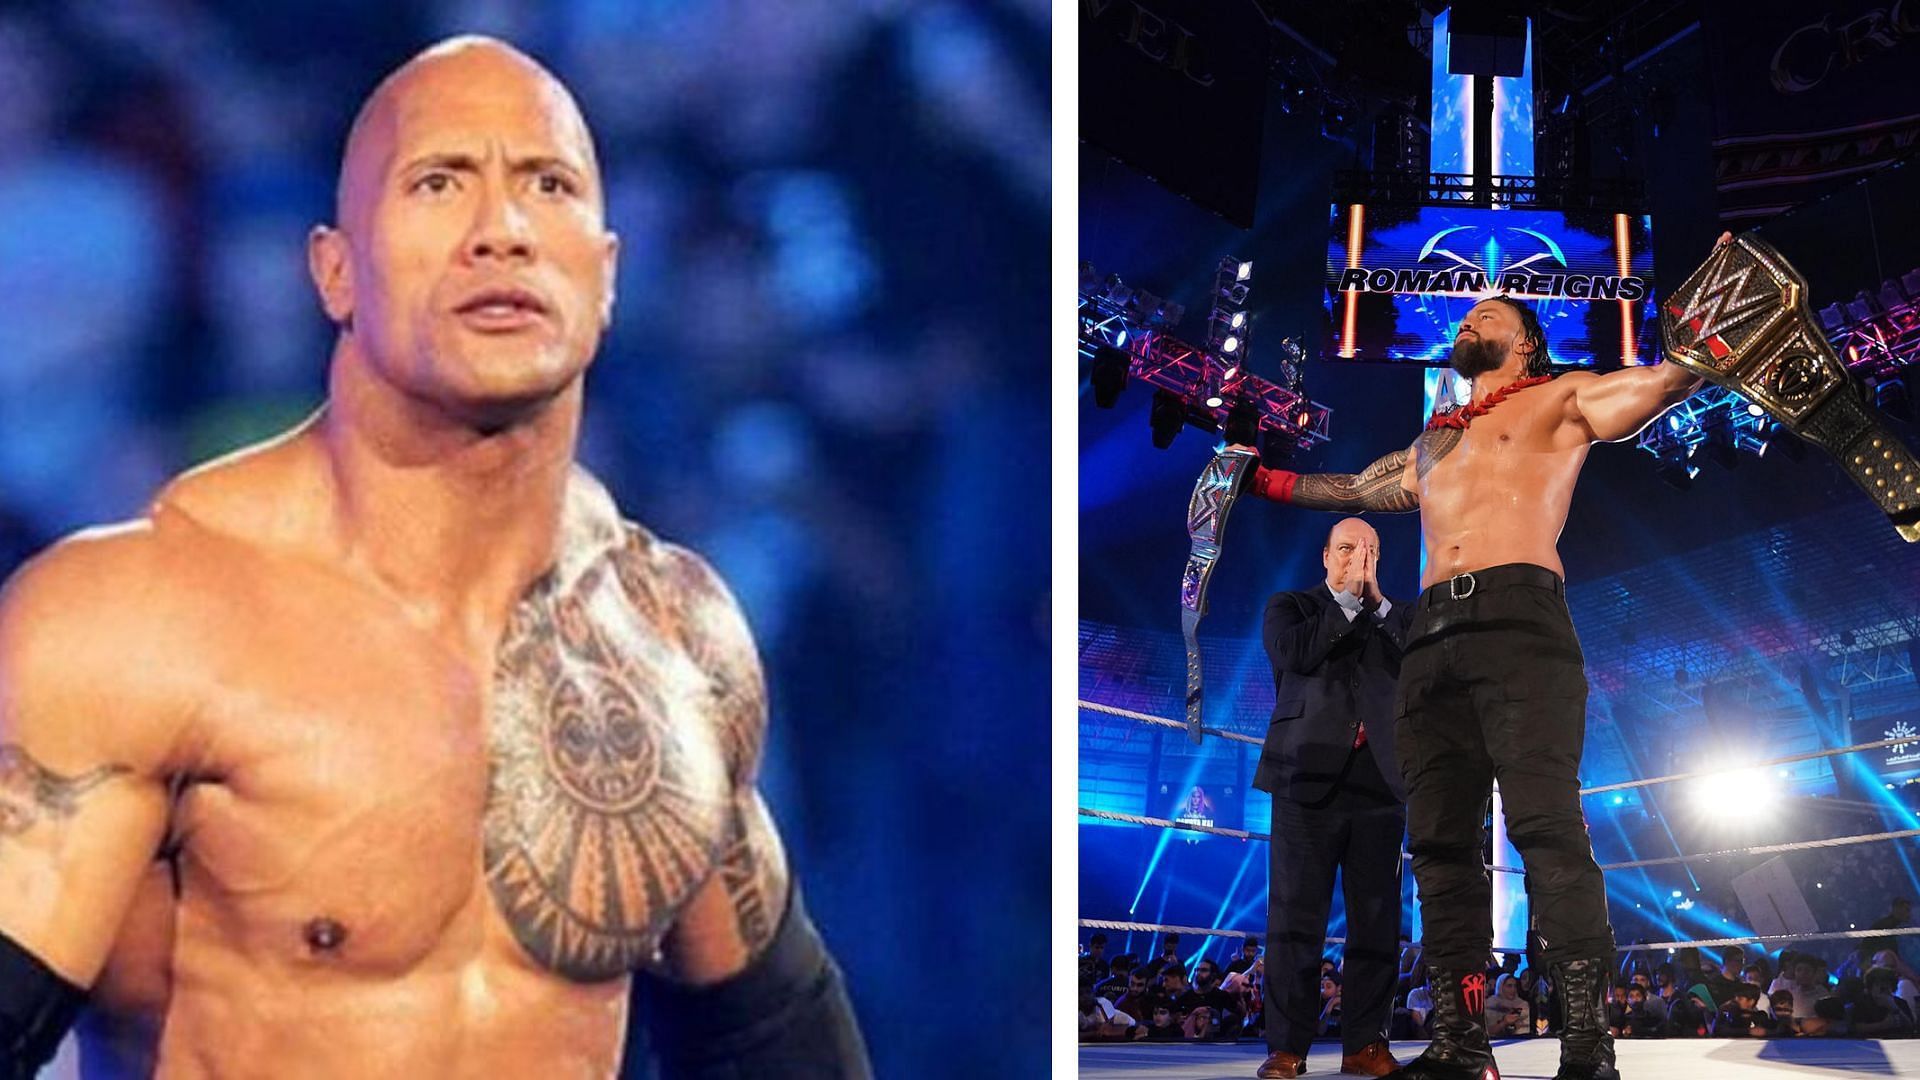 The Rock may face Roman Reigns at WrestleMania Hollywood.